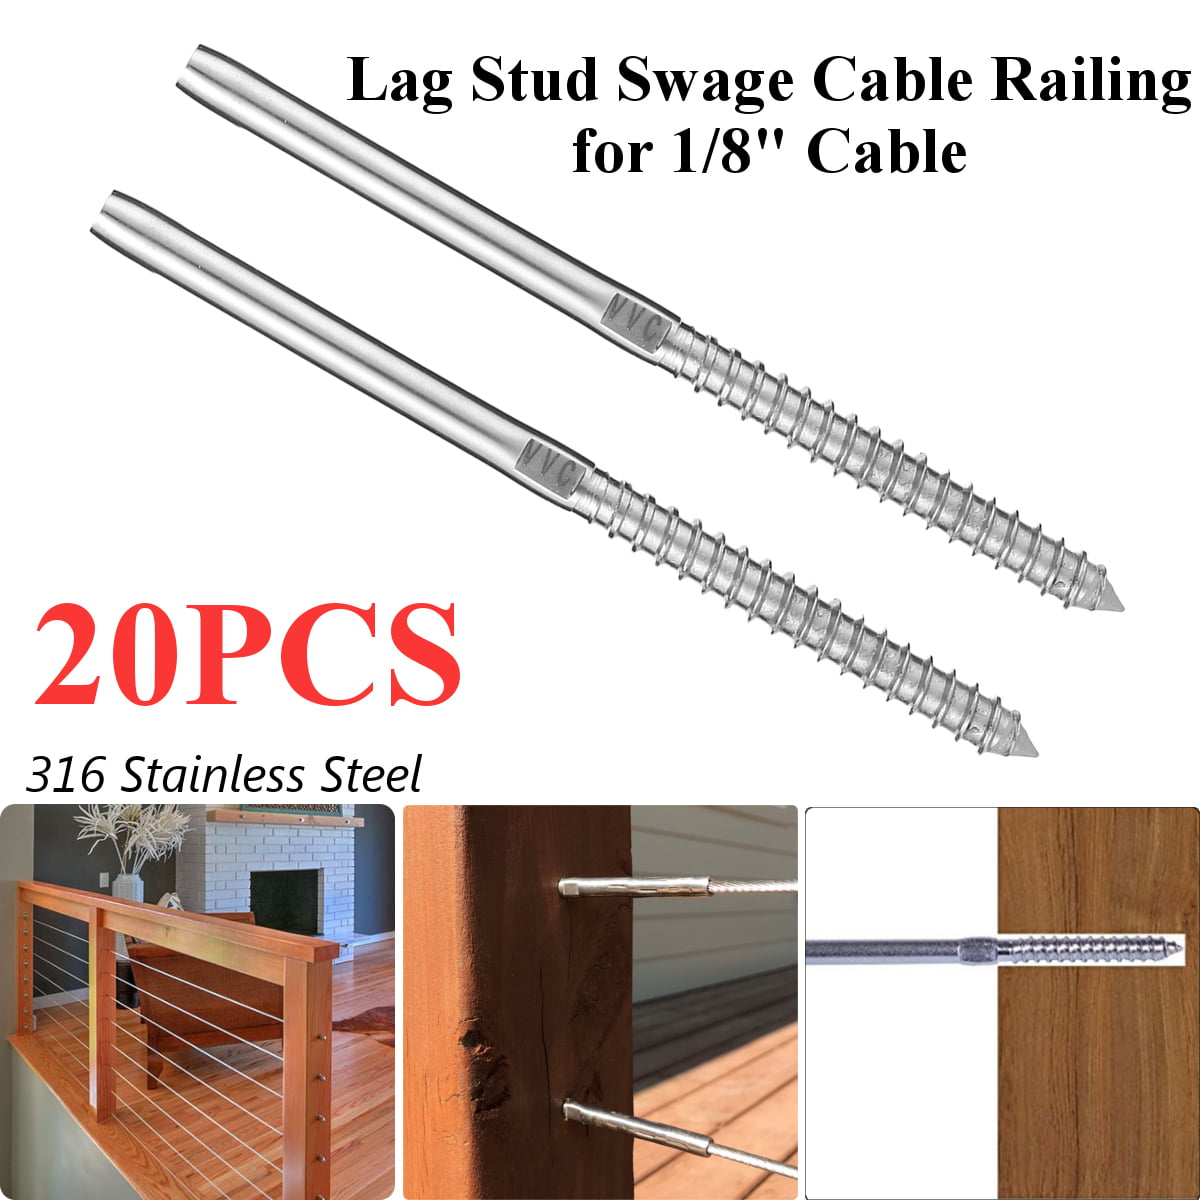 2 PCS ~ T316 Stainless Steel Lag Stud Swage Cable Railing for 1/8" Cable 